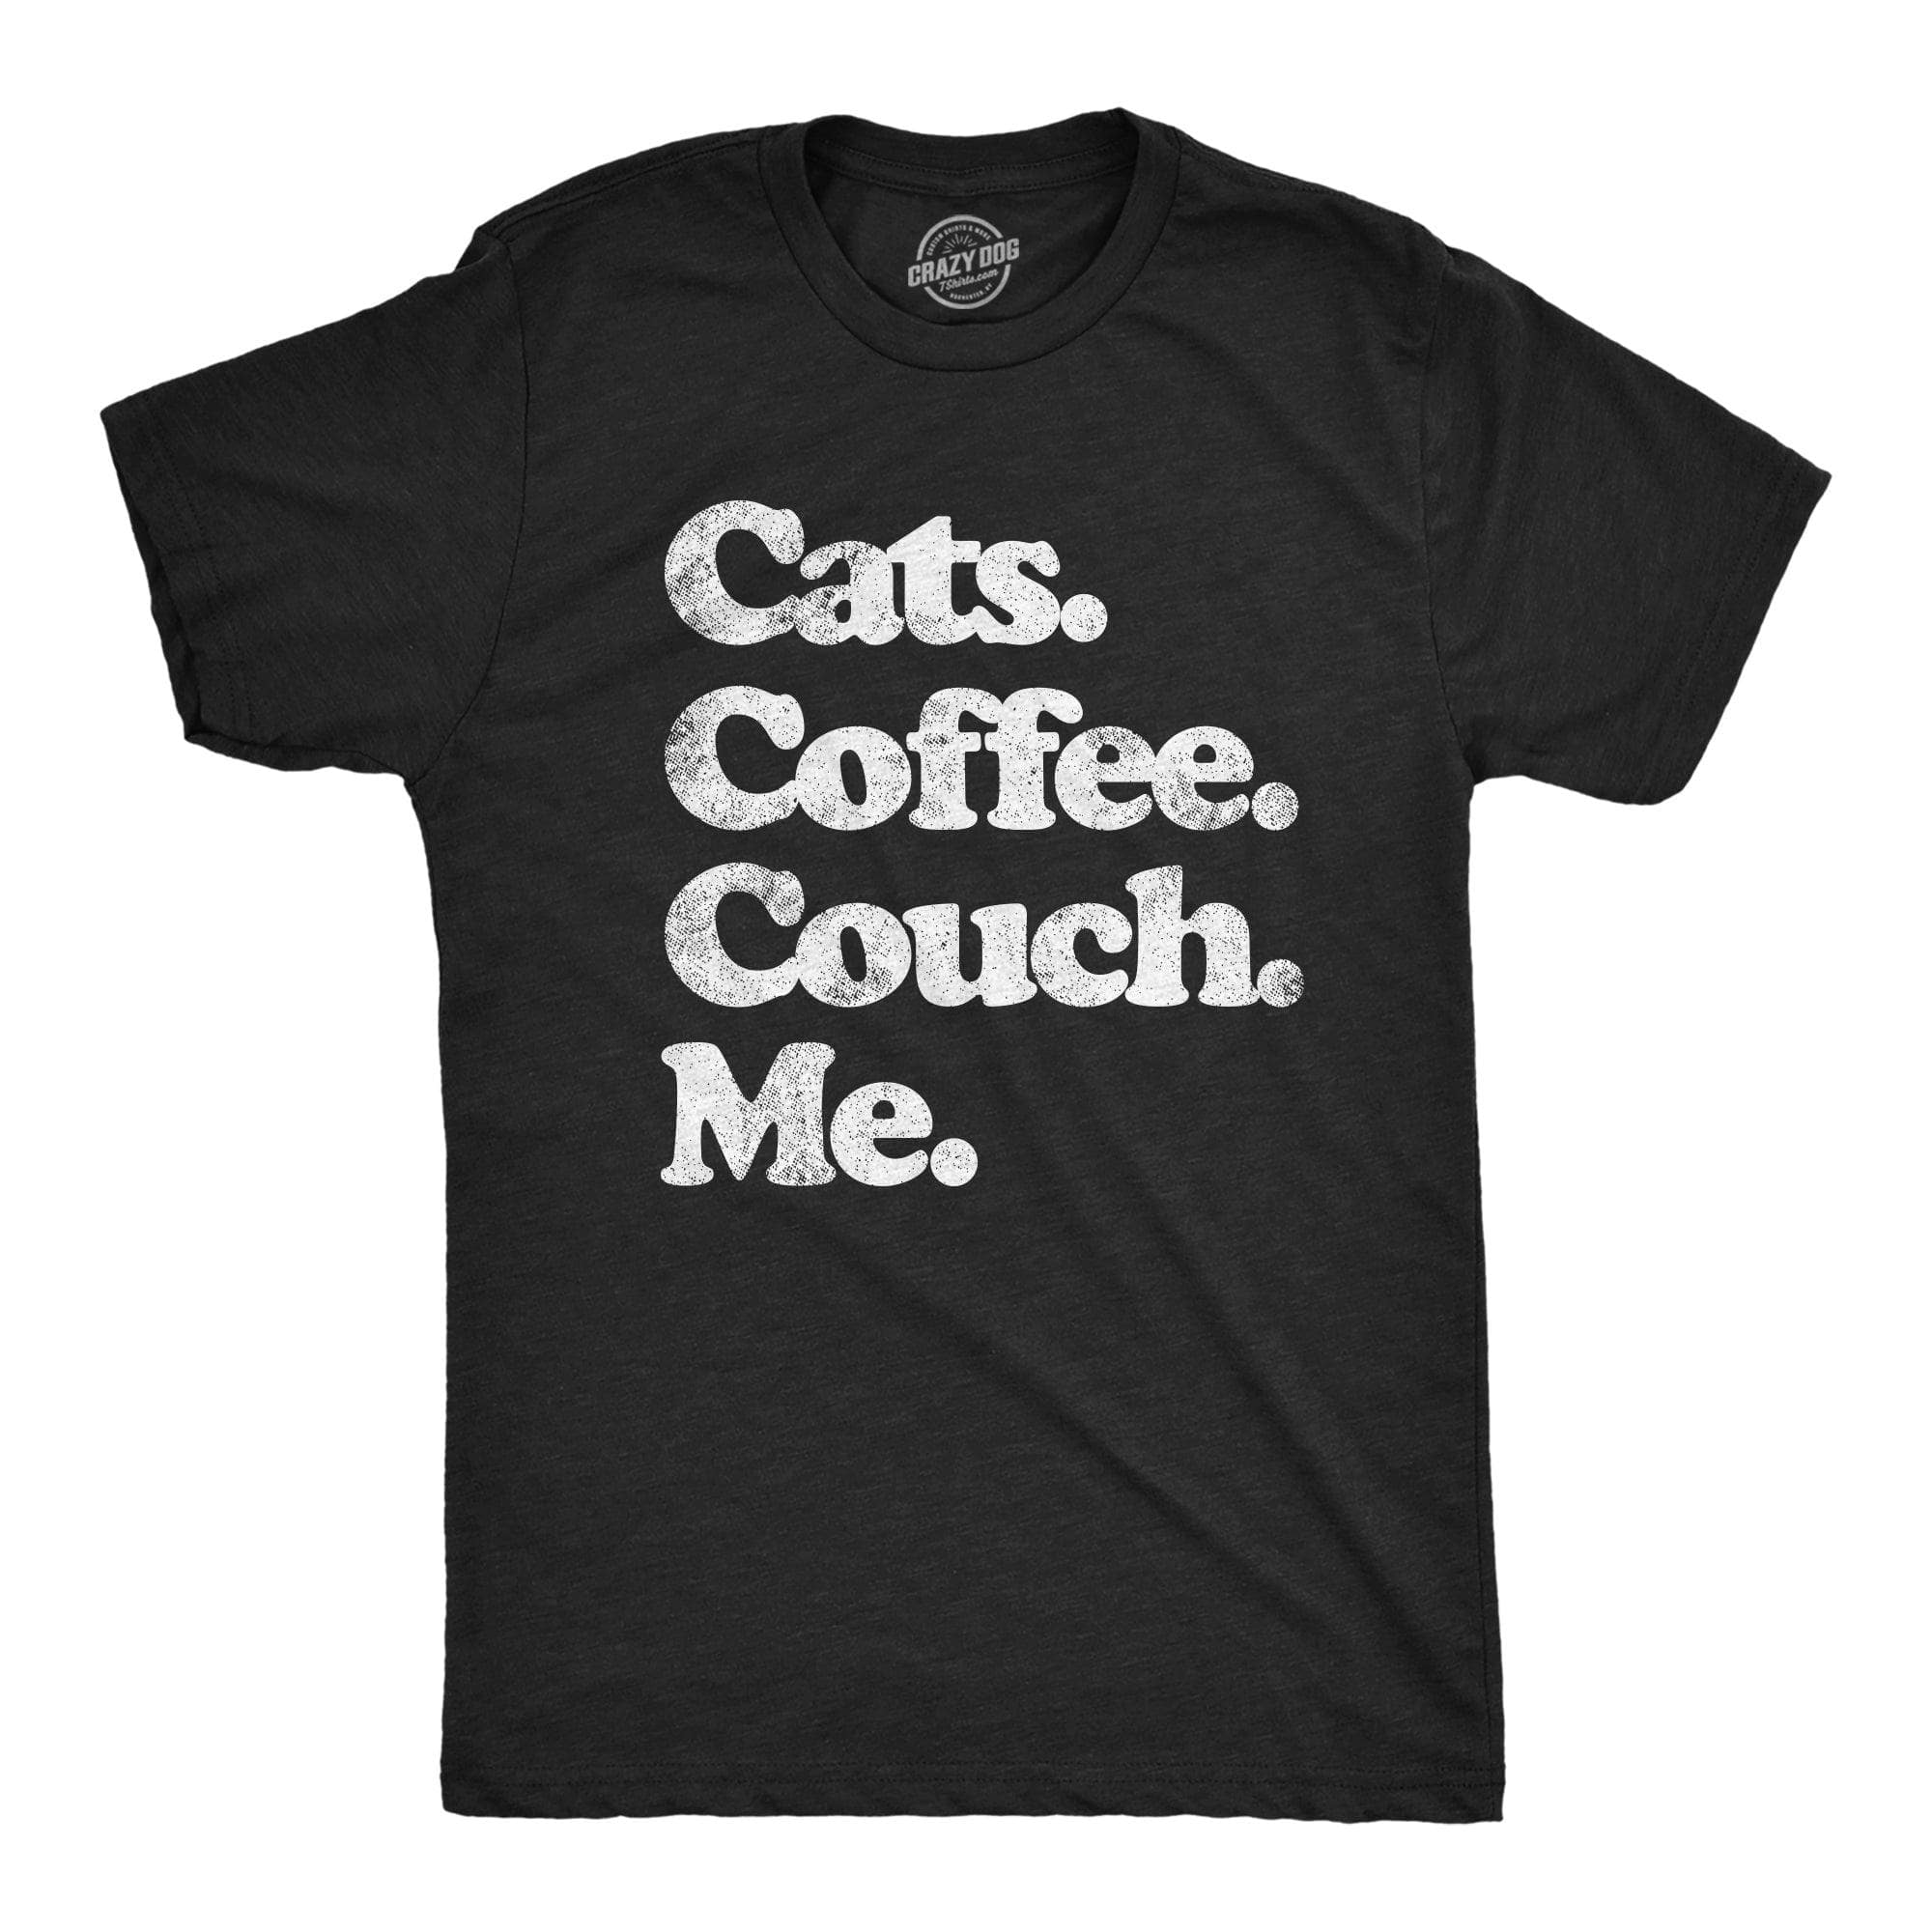 Cats Coffee Couch Me Men's Tshirt  -  Crazy Dog T-Shirts